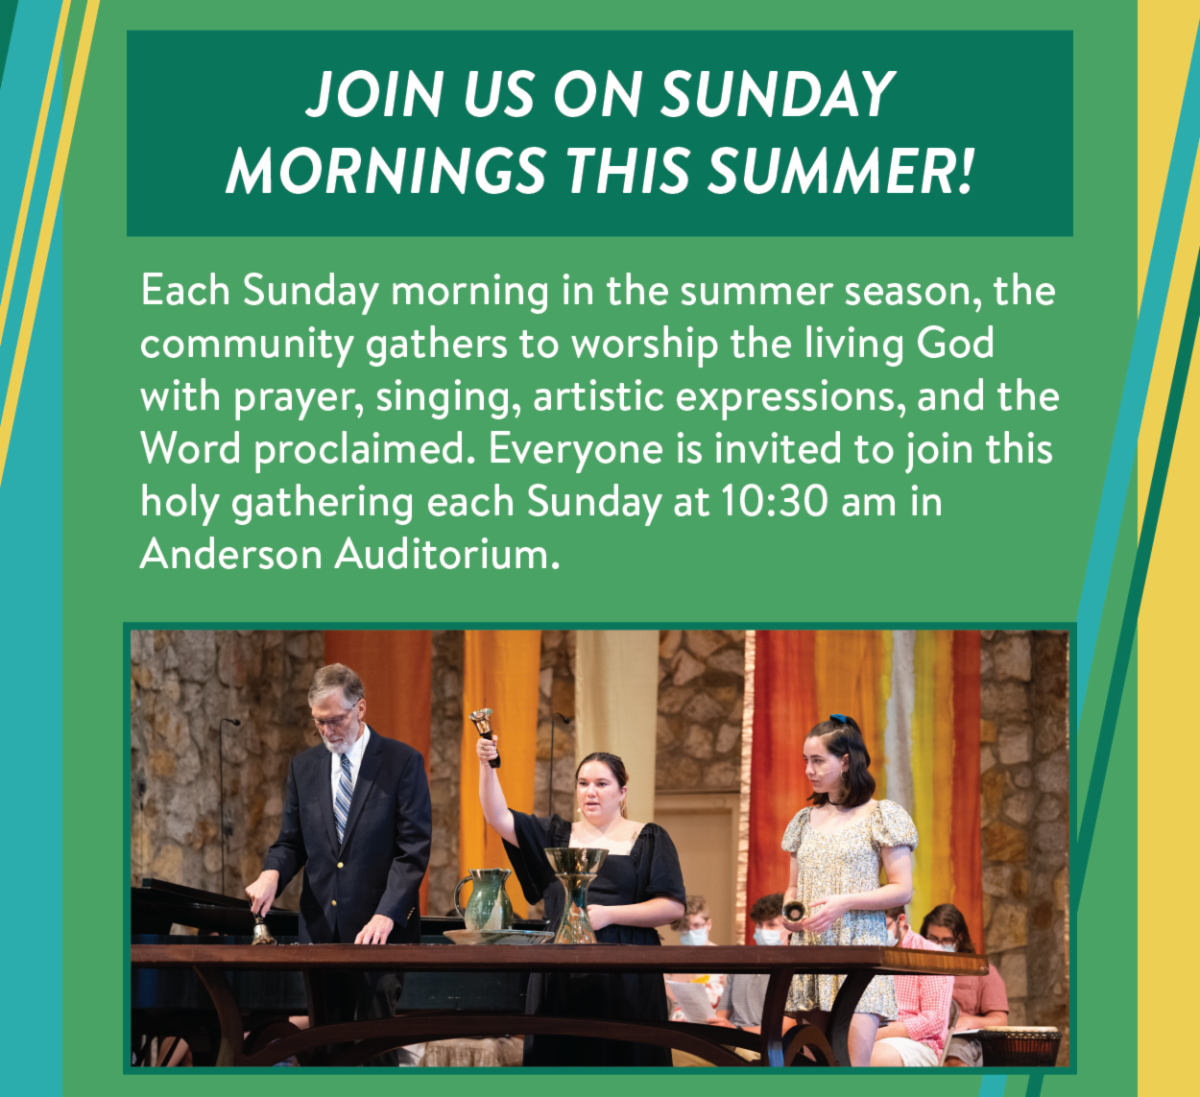 Join us on Sunday mornings this summer! - Each Sunday morning in the summer season, the community gathers to worship the living God with prayer, singing, artistic expressions, and the Word proclaimed. Everyone is invited to join this holy gathering each Sunday at 10:30 am in Anderson Auditorium.